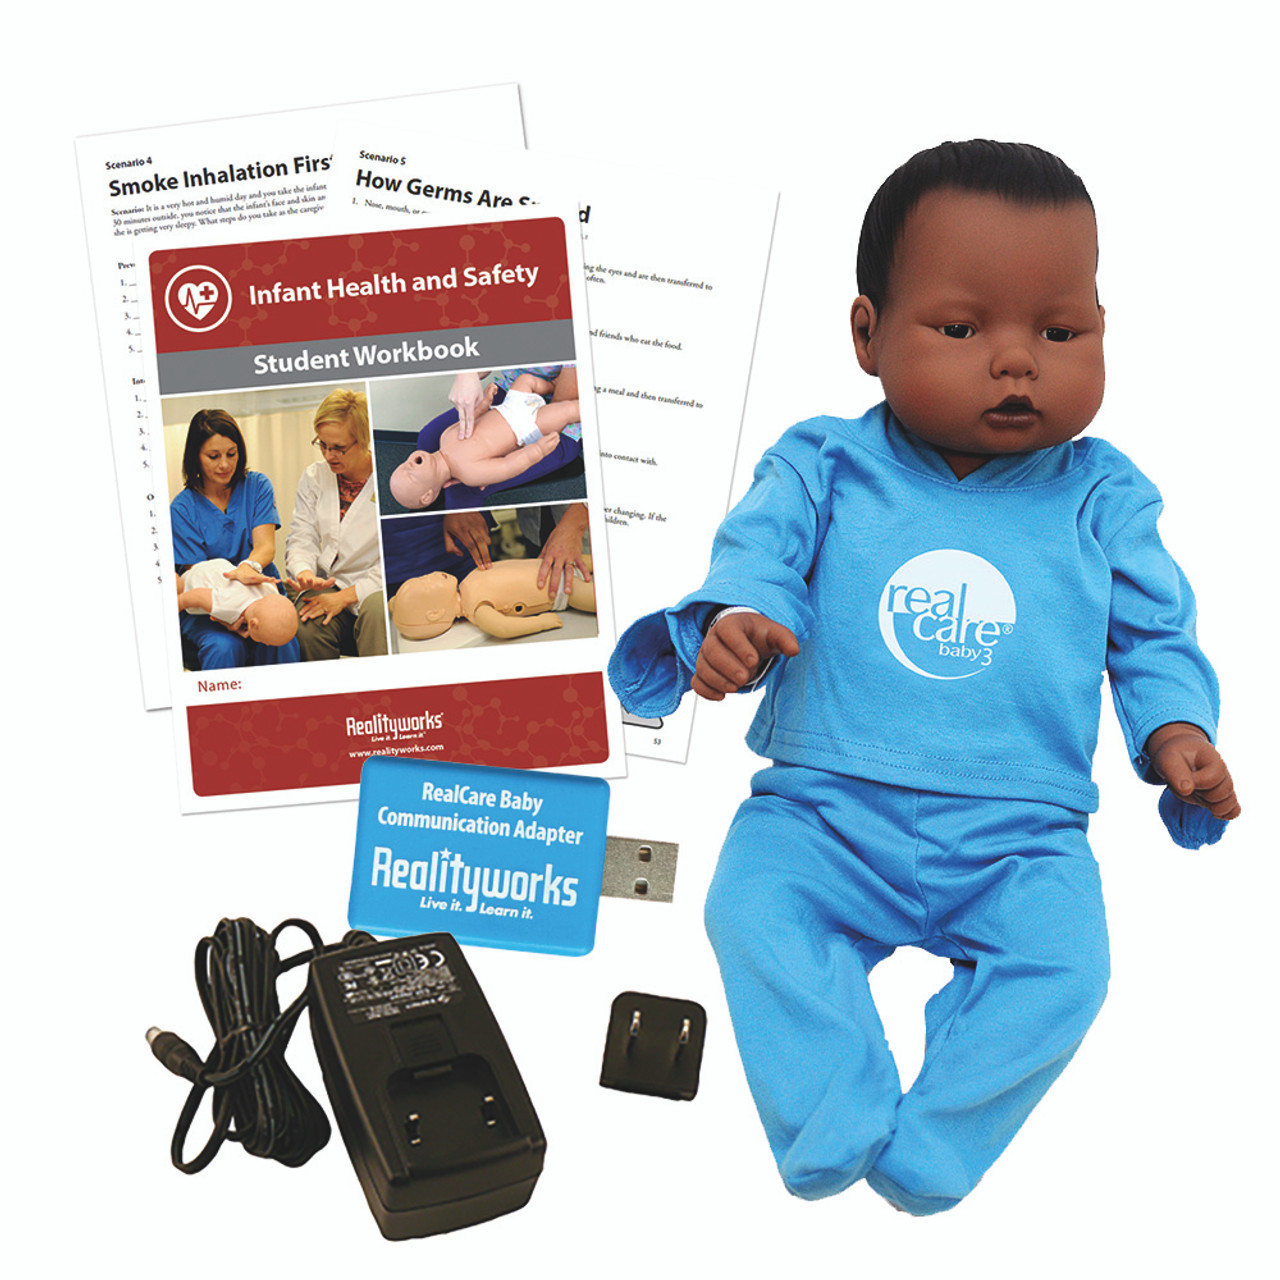 https://cdn11.bigcommerce.com/s-aw6hetyvsy/images/stencil/1280x1280/products/29851/37607/realcare-baby-infant-simulator-start-pack-web-image__30948.1639658401.jpg?c=1